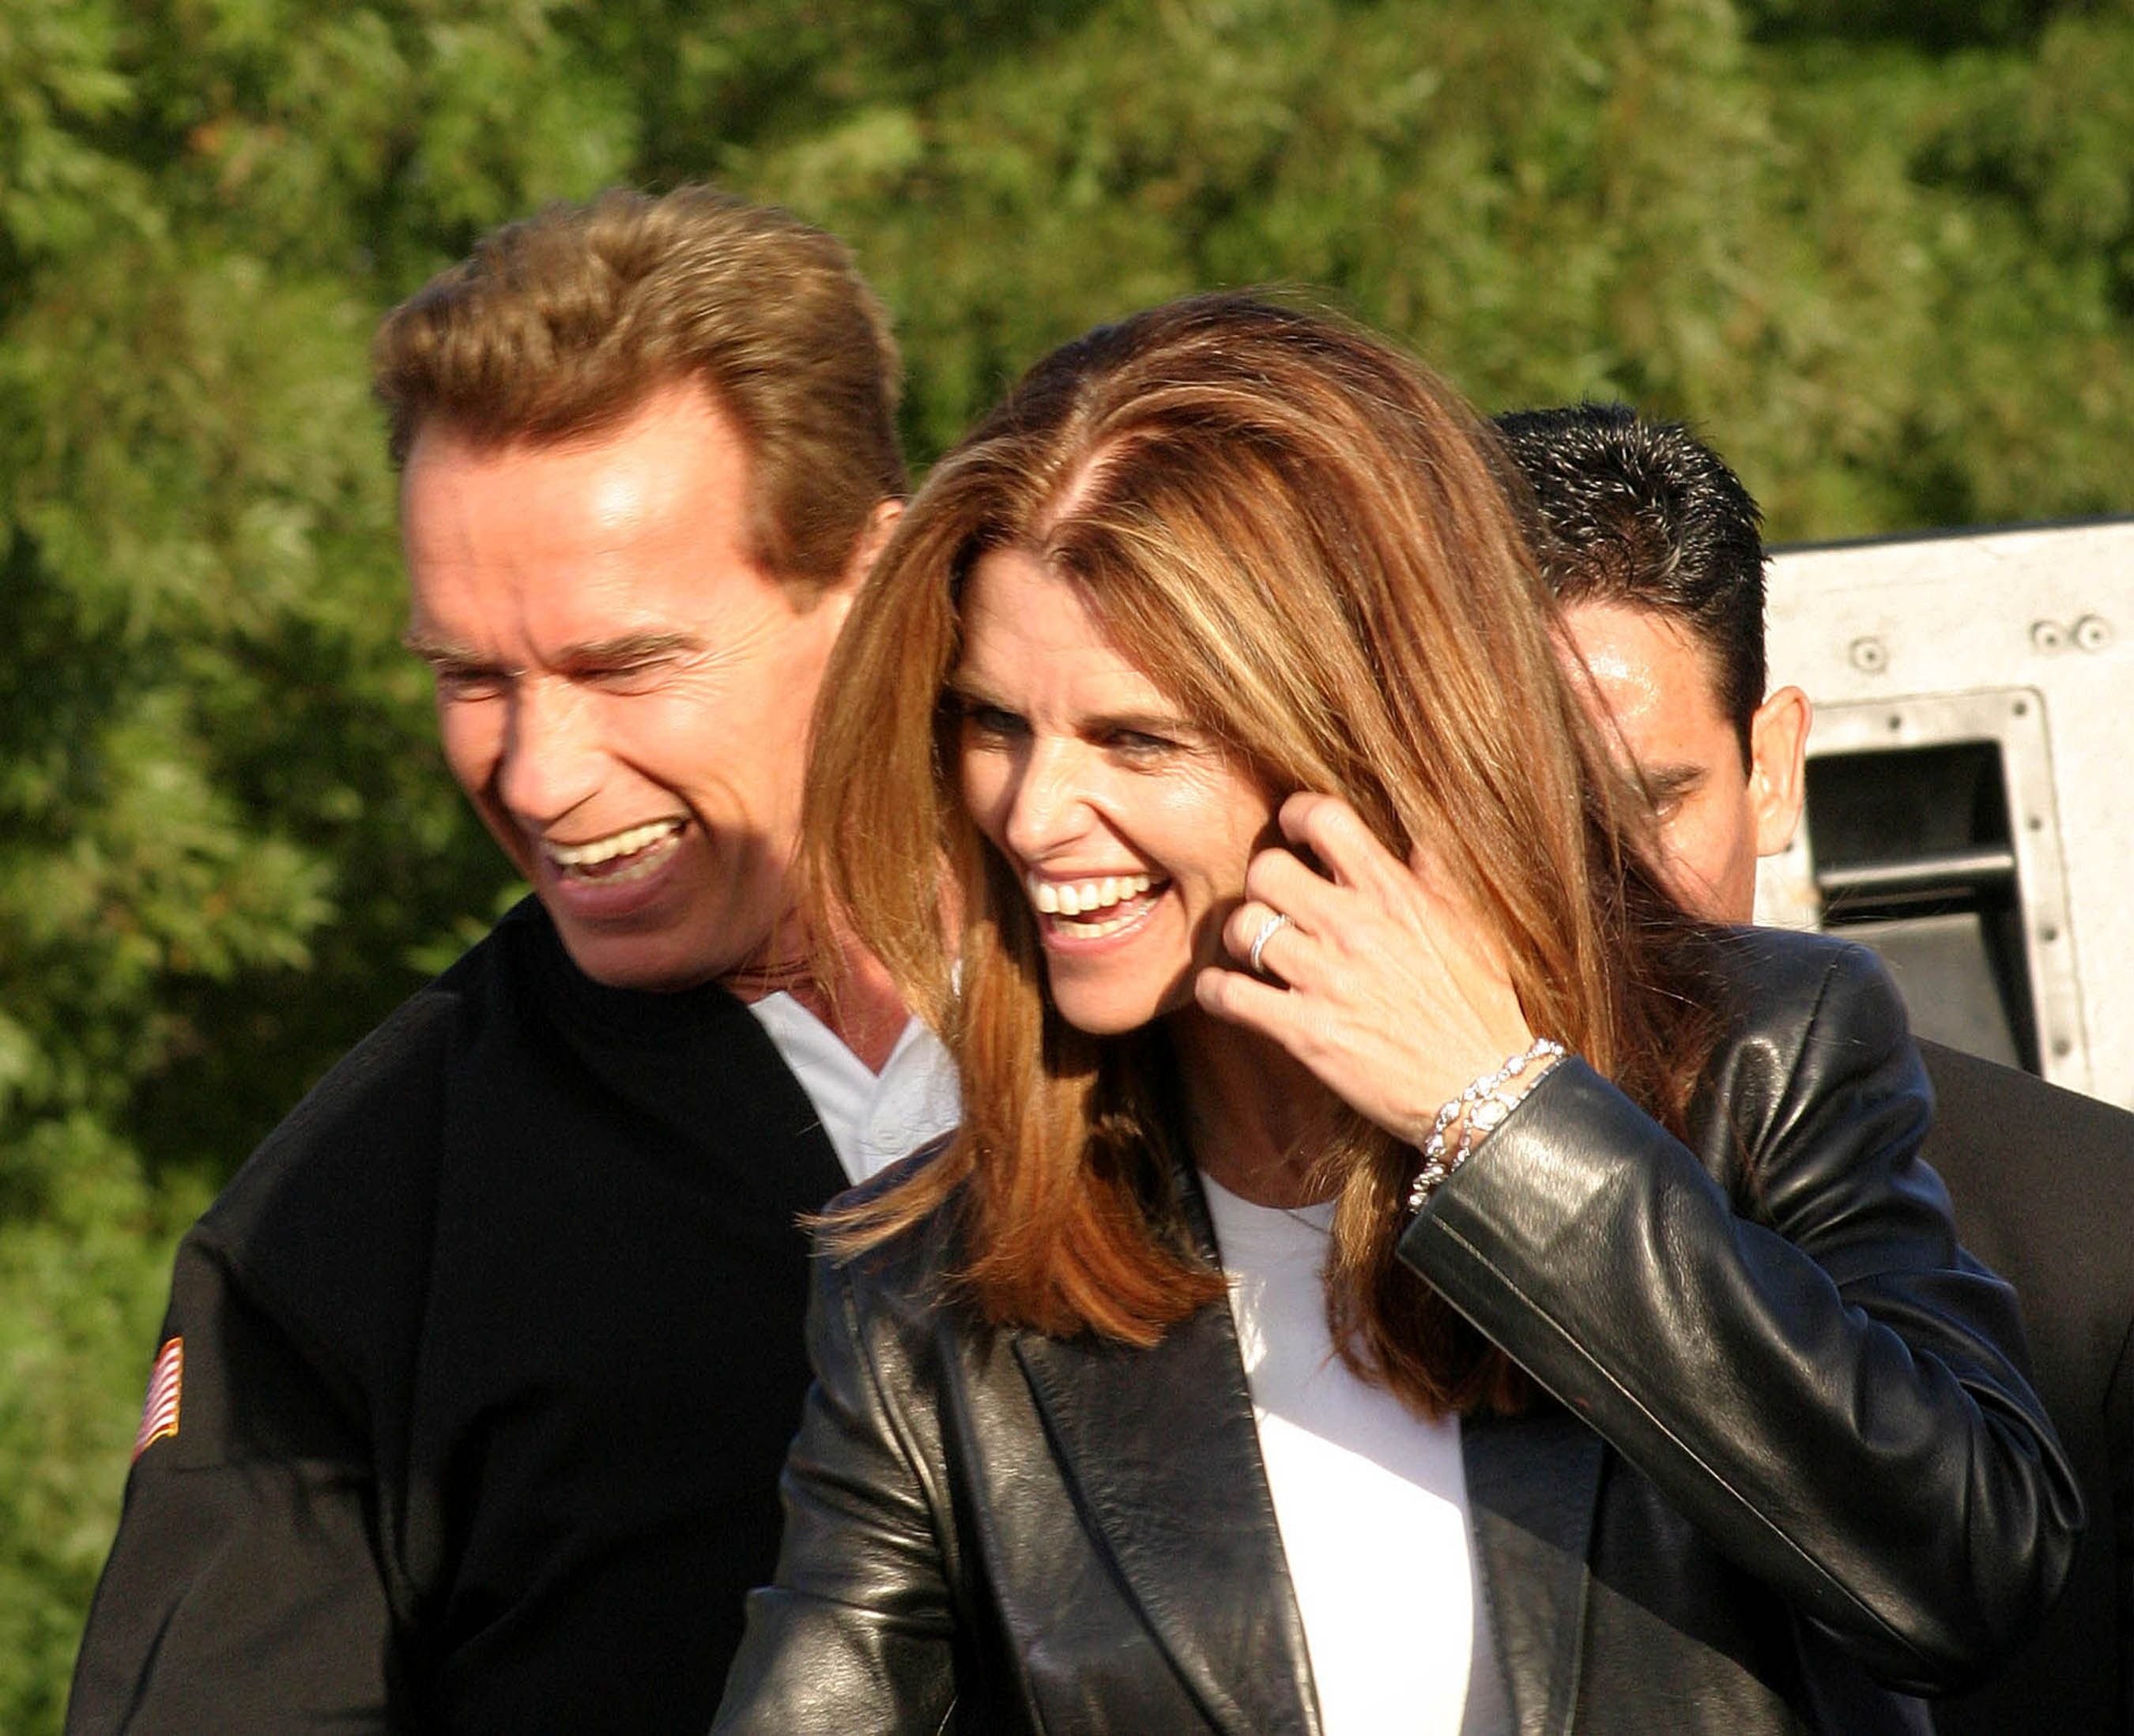 Arnold Schwarzenegger, Maria Shriver at the CA Comeback Express Bus Tour in Pleasanton, CA on October 4, 2003 | Source: Getty Images 